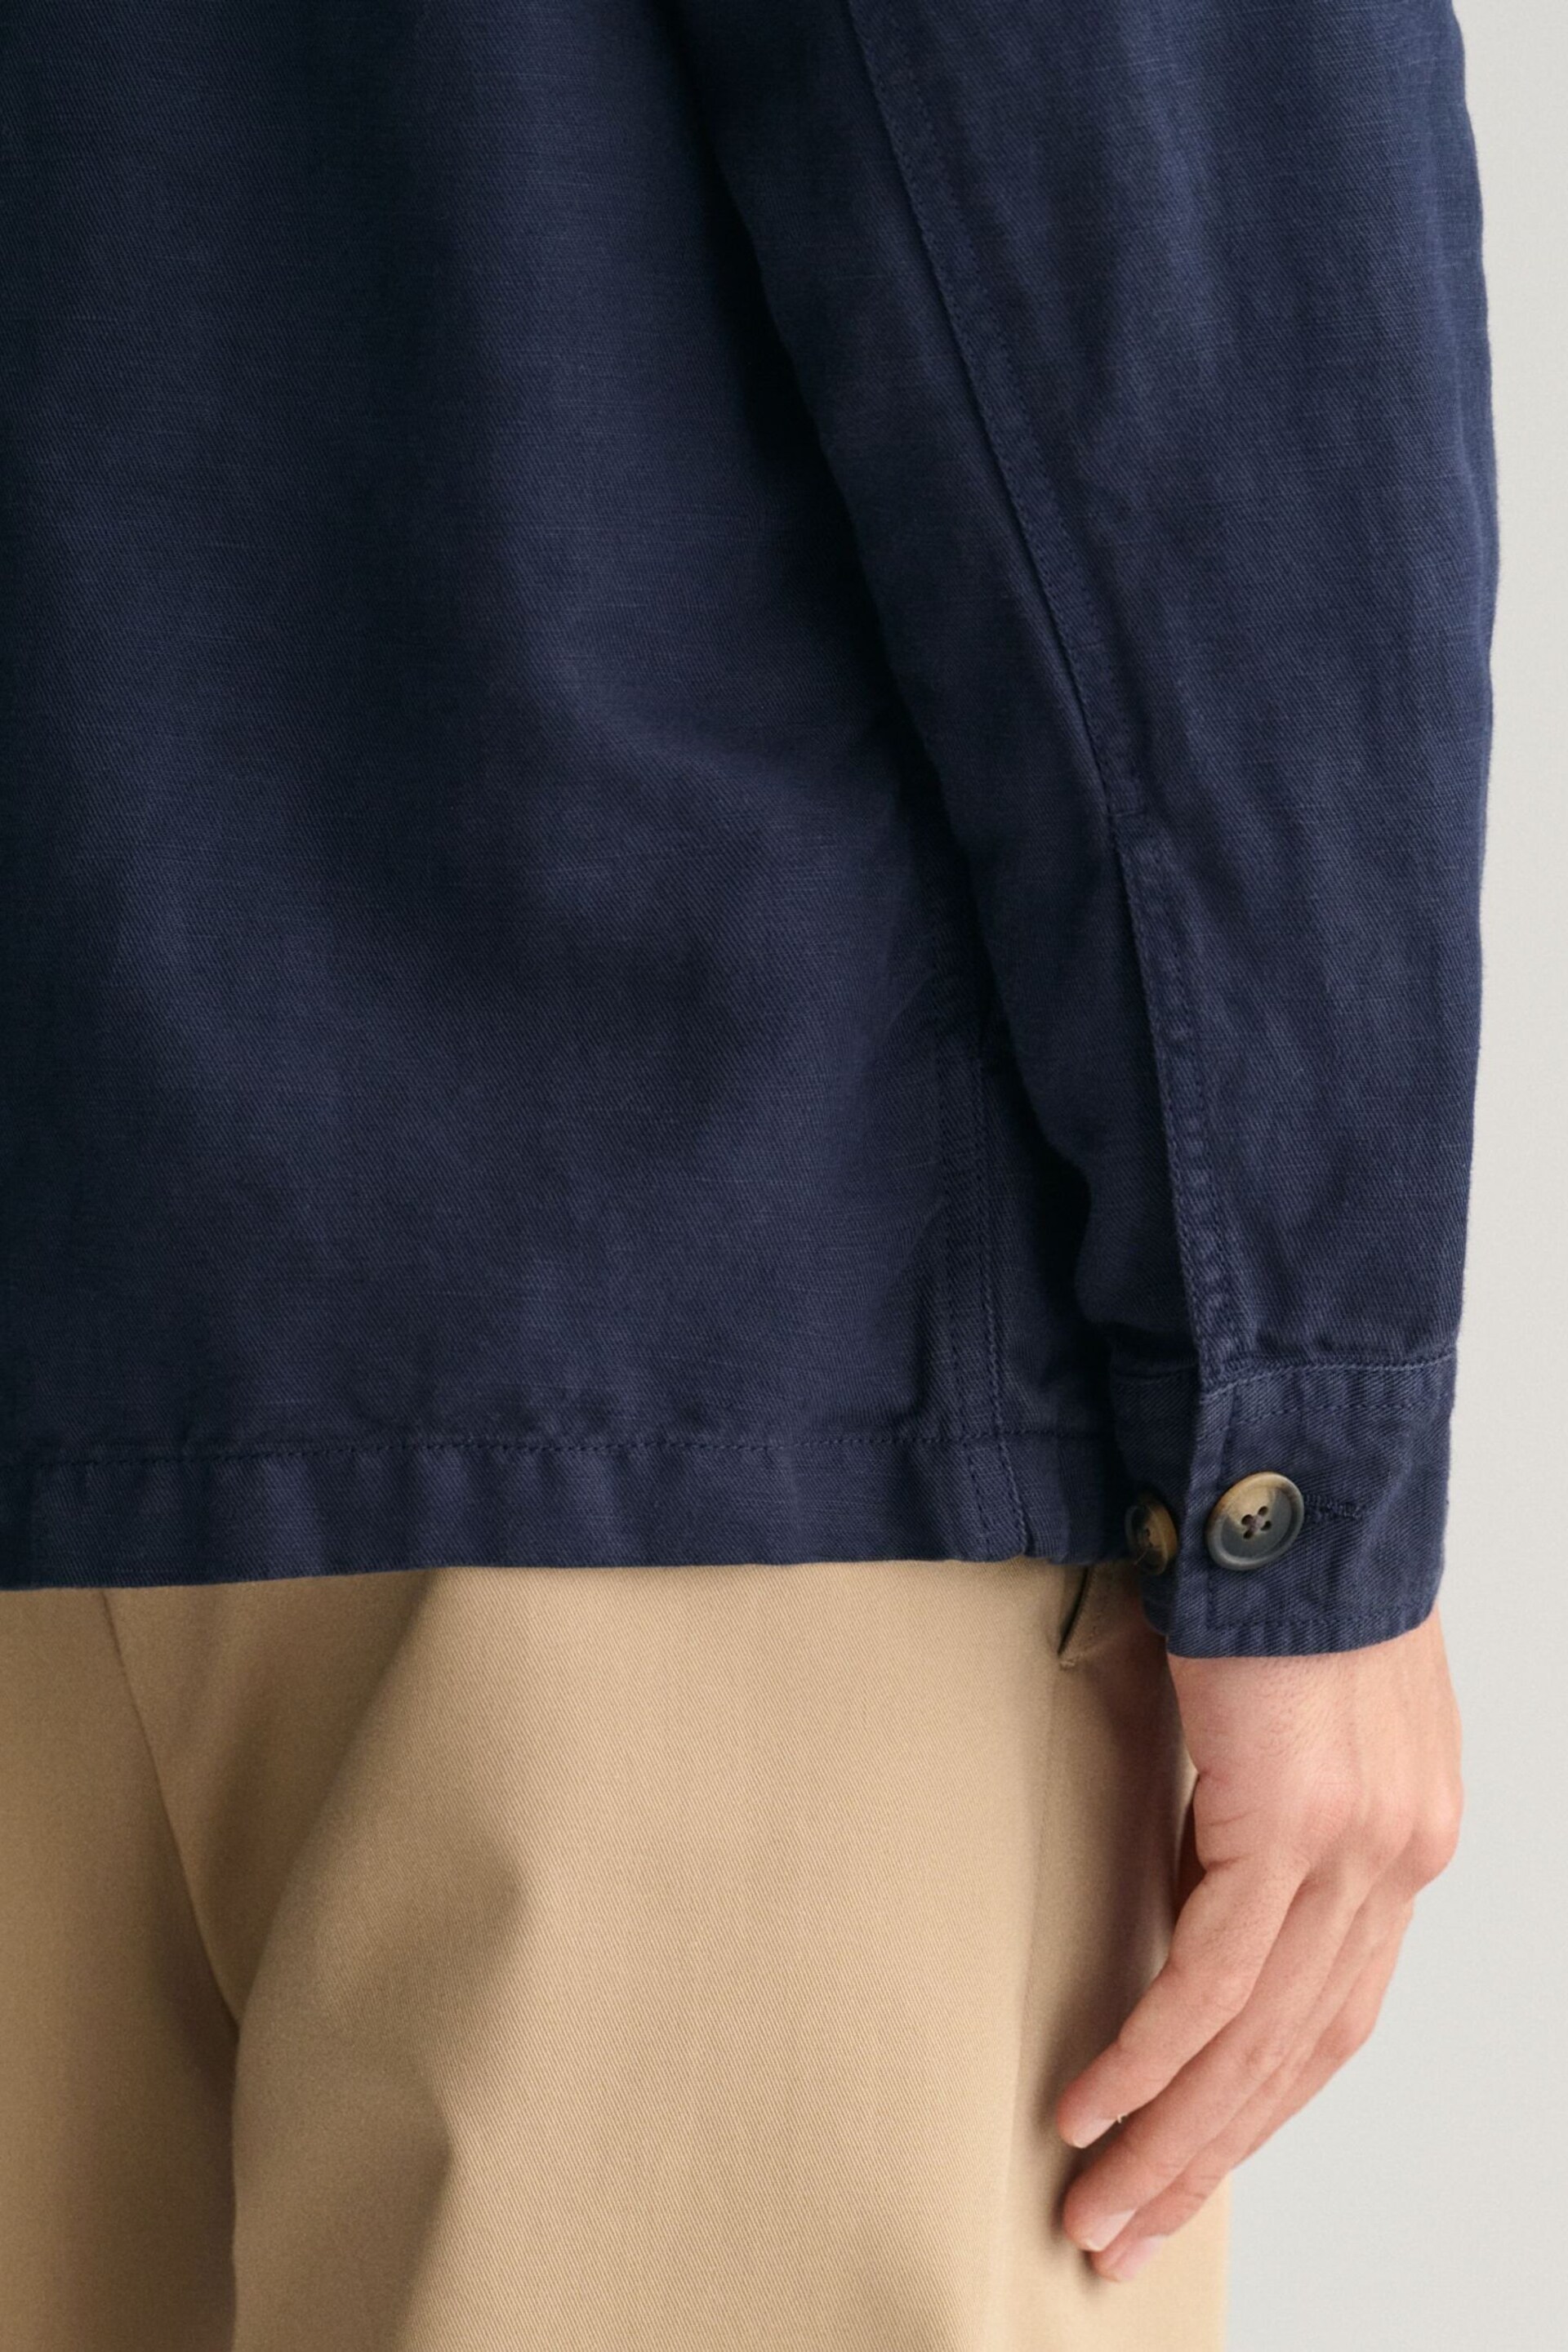 GANT Blue Relaxed Fit Cotton Linen Twill Overshirt - Image 5 of 7